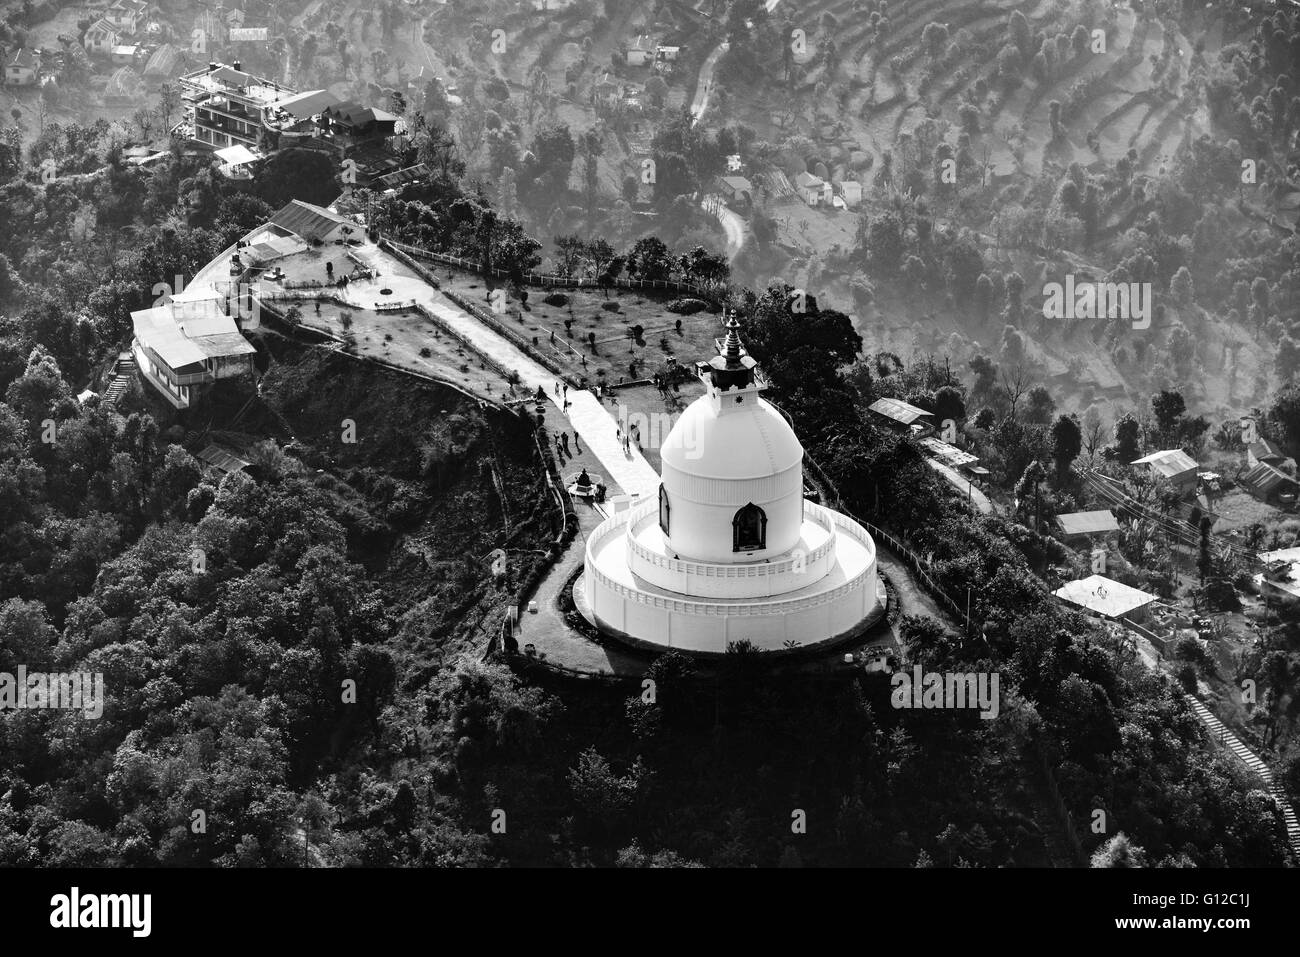 Aerial view of the World Peace Pagoda in Pokhara, Nepal. Black and white photography. Stock Photo